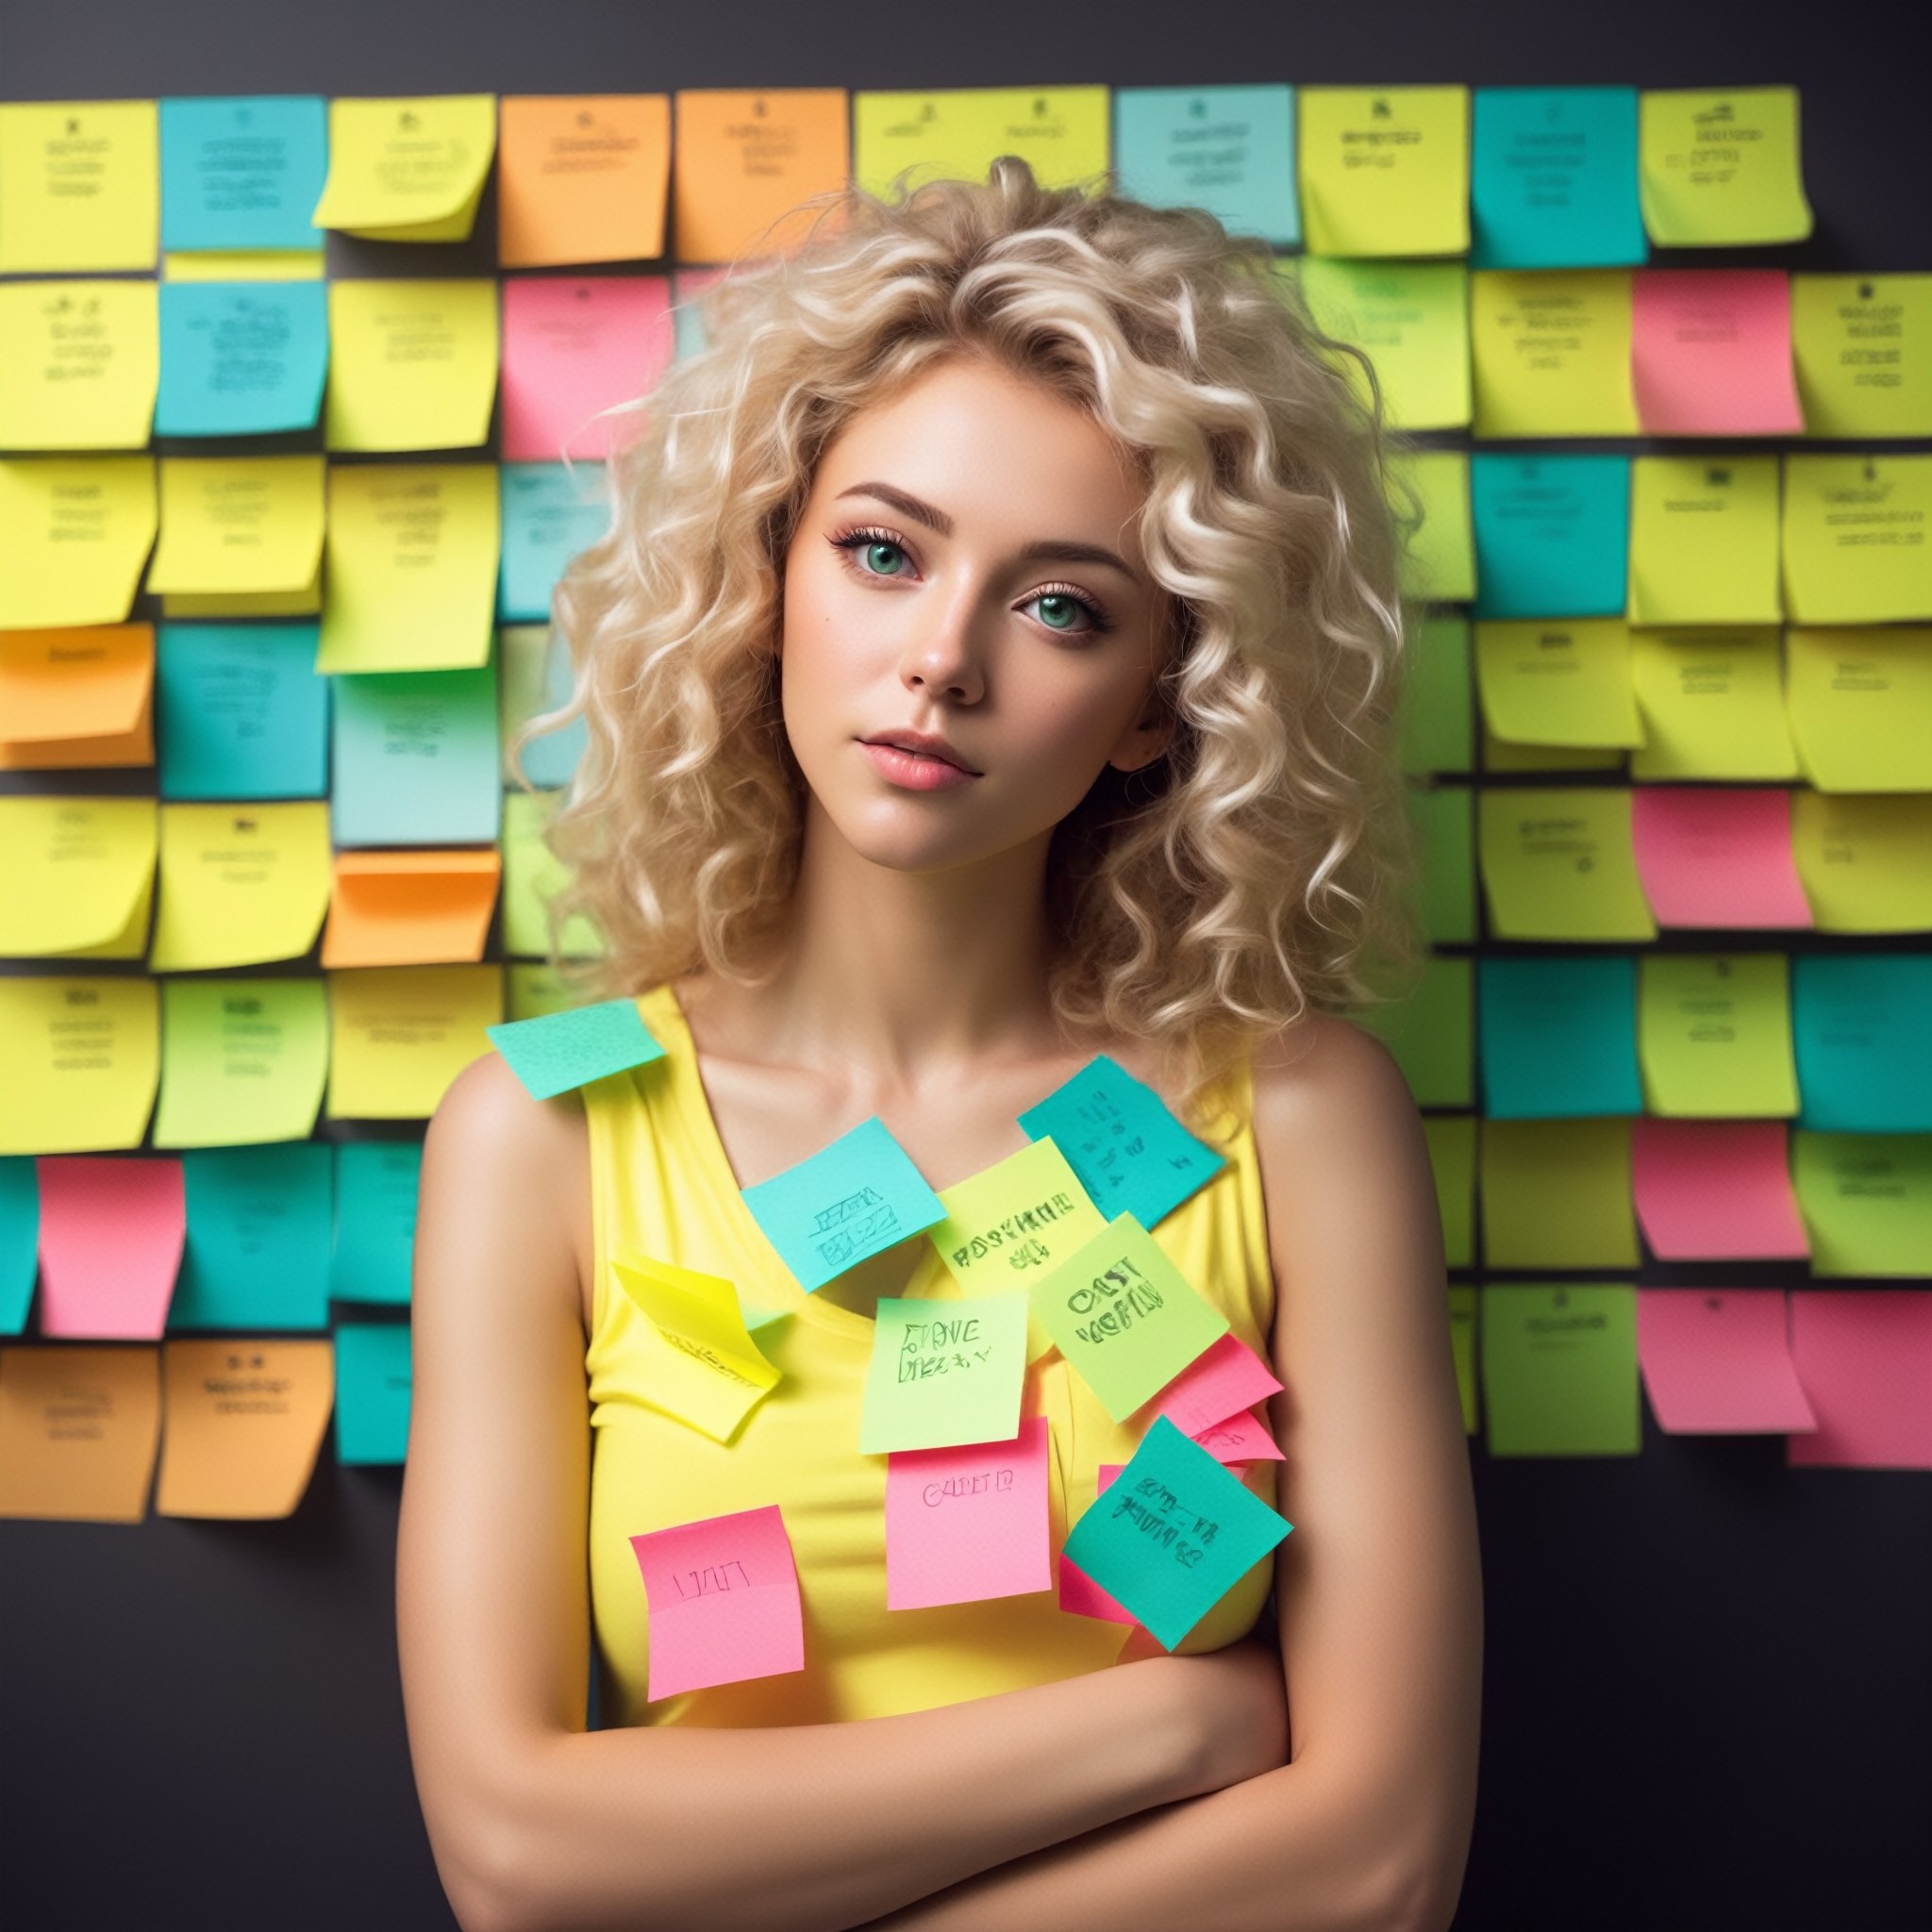 beautiful woman with blond curly hair and fluffy, looking off into the distance with green eyes, (hair covered in multi-colored post-it notes:1.8), outfit made out of post-it notes, post-it notes covering chest and arms, background has two walls with multi-colored post it notes
,text logo